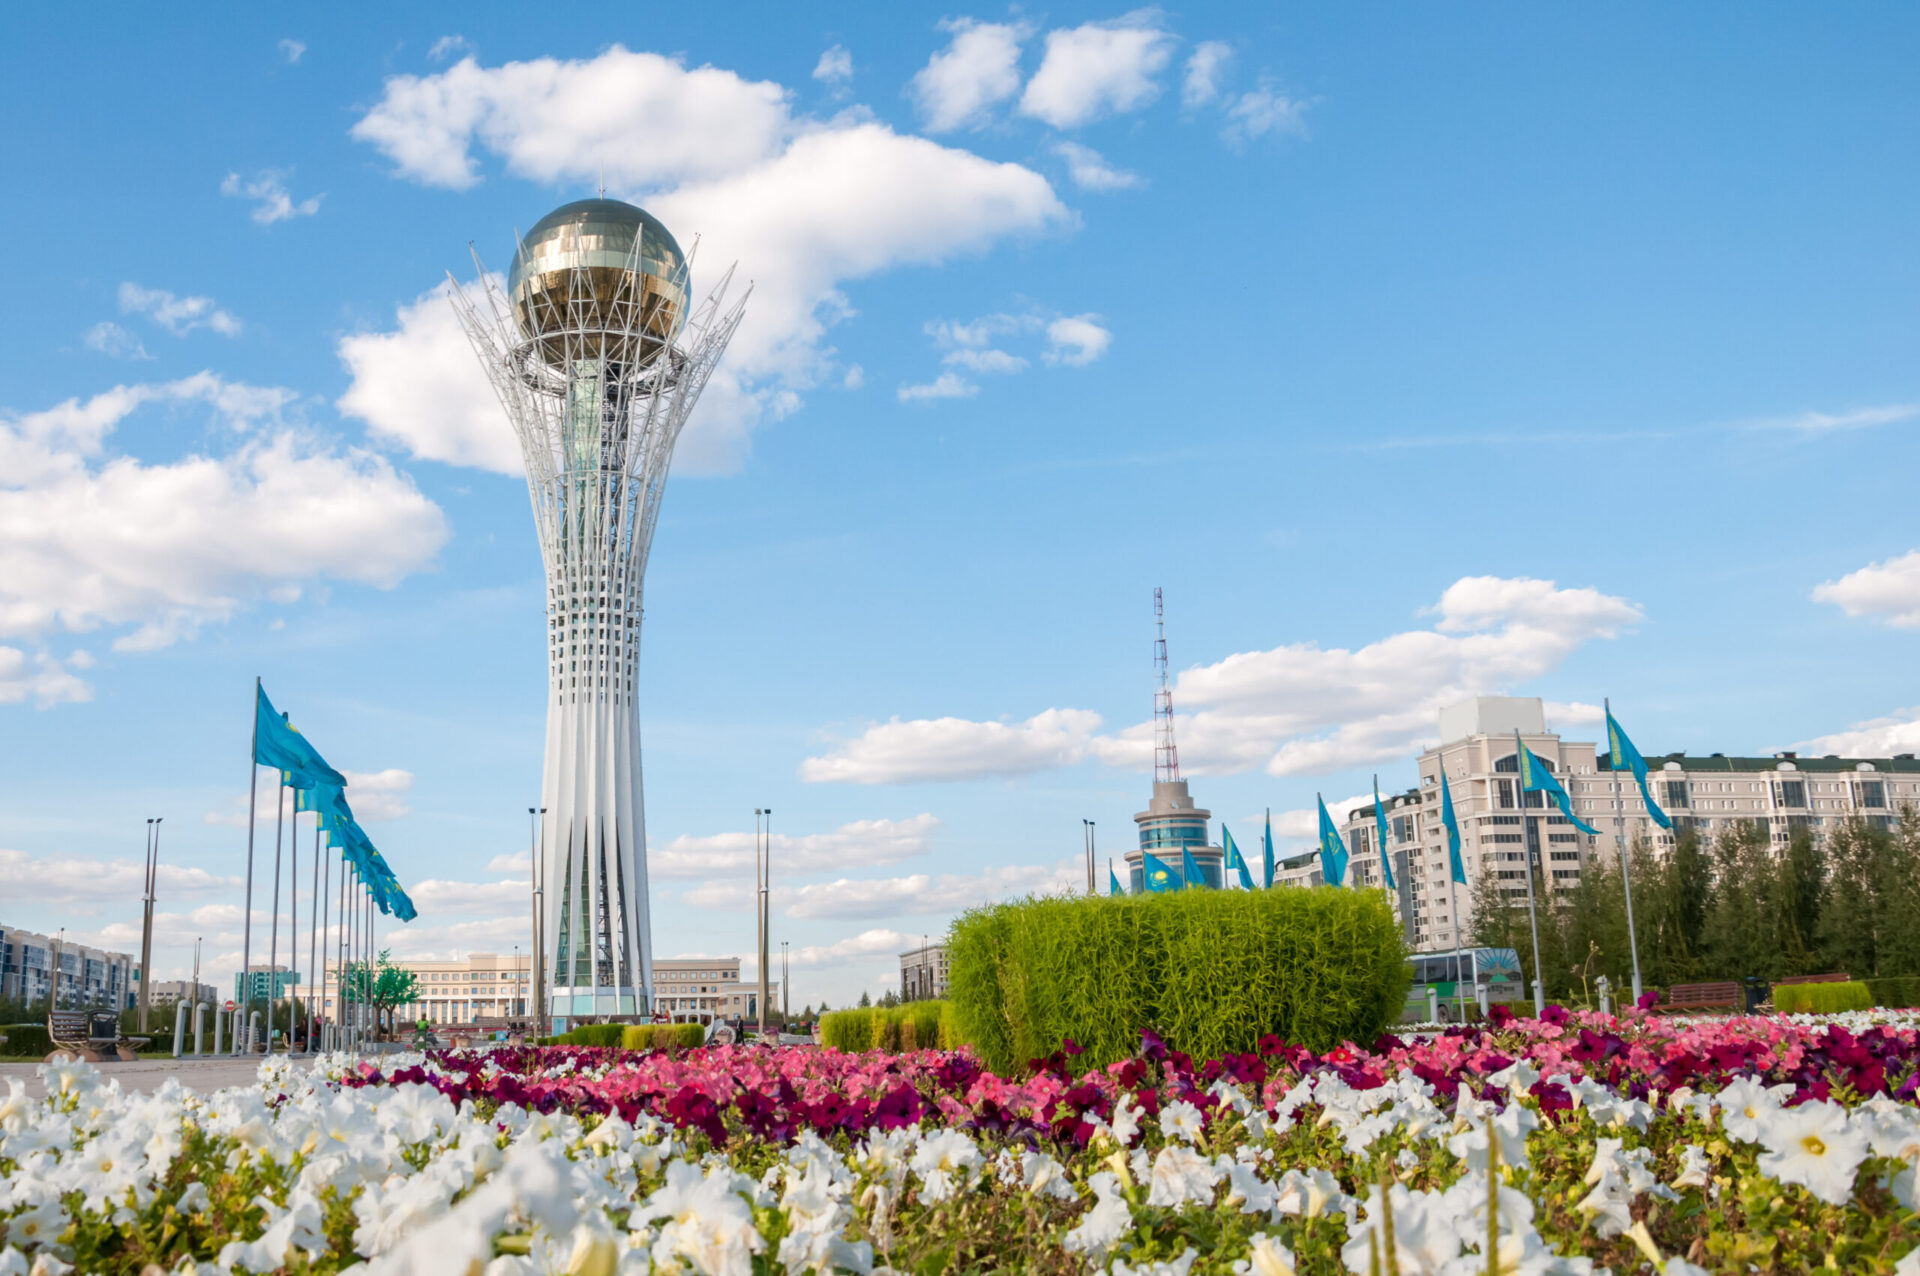 Bayterek is a monument and observation tower in Astana, Kazakhstan.